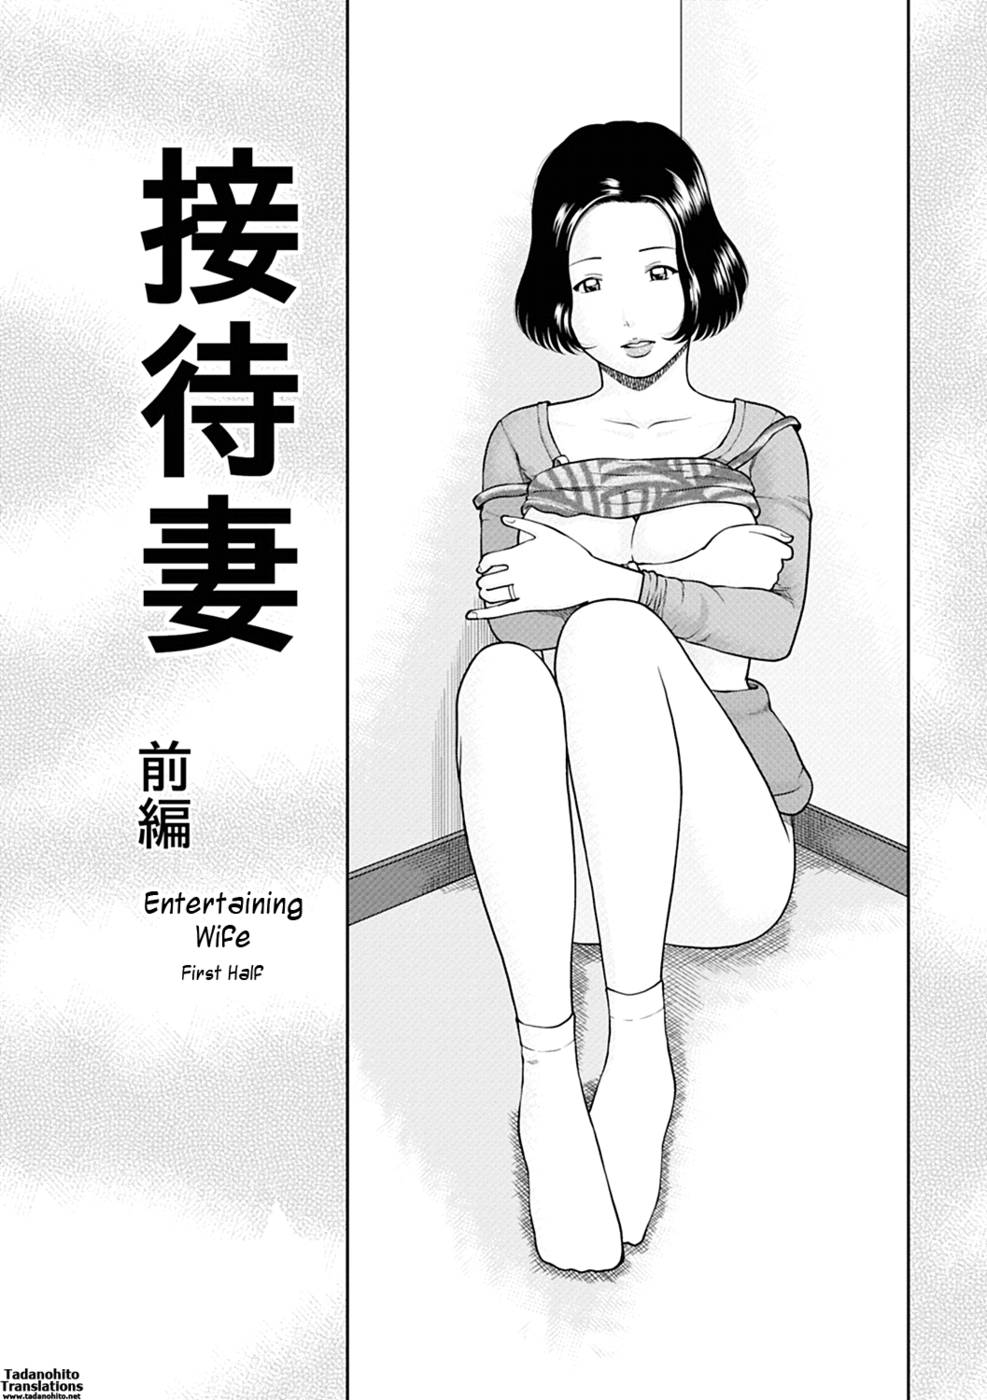 Hentai Manga Comic-34 Year Old Unsatisfied Wife-Chapter 3-Entertaining Wife-First Half-1